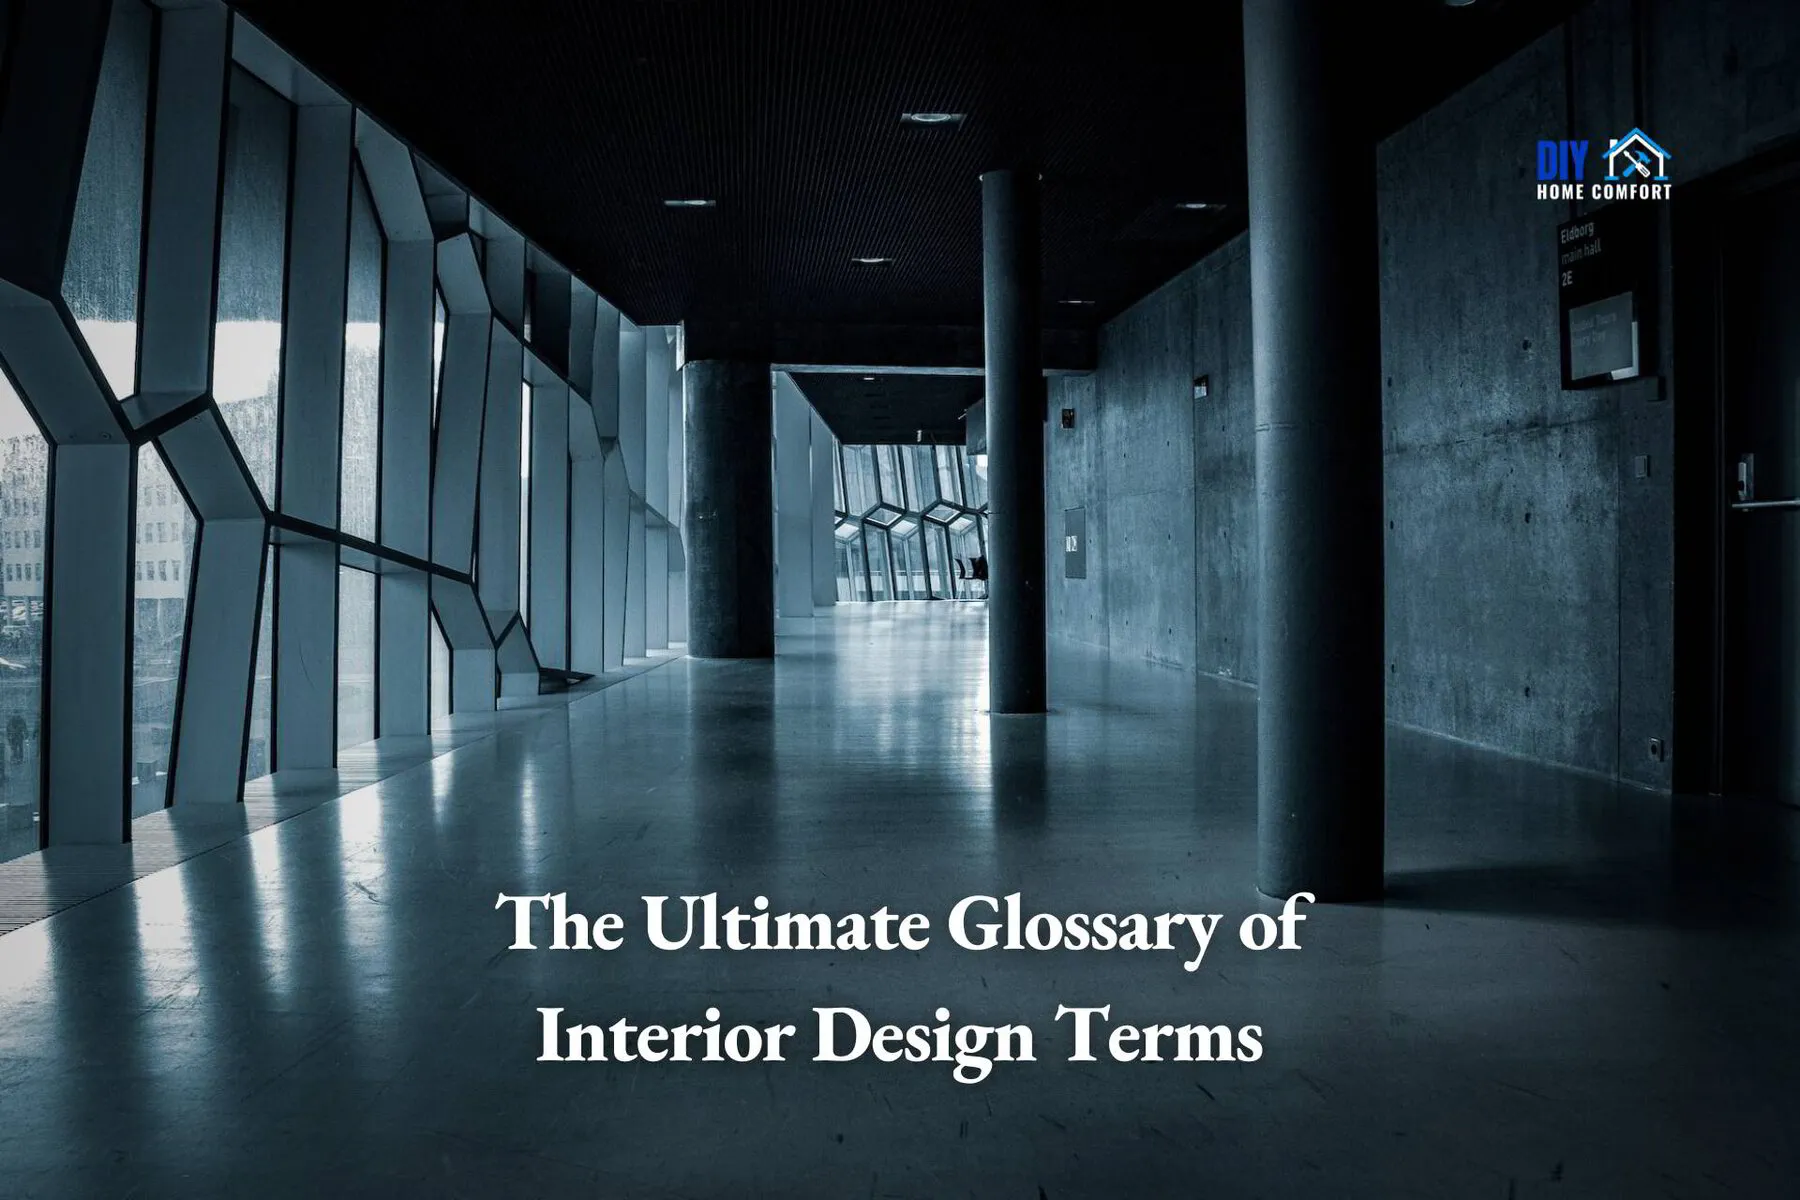 The Ultimate Glossary of Interior Design Terms | DIY Home Comfort